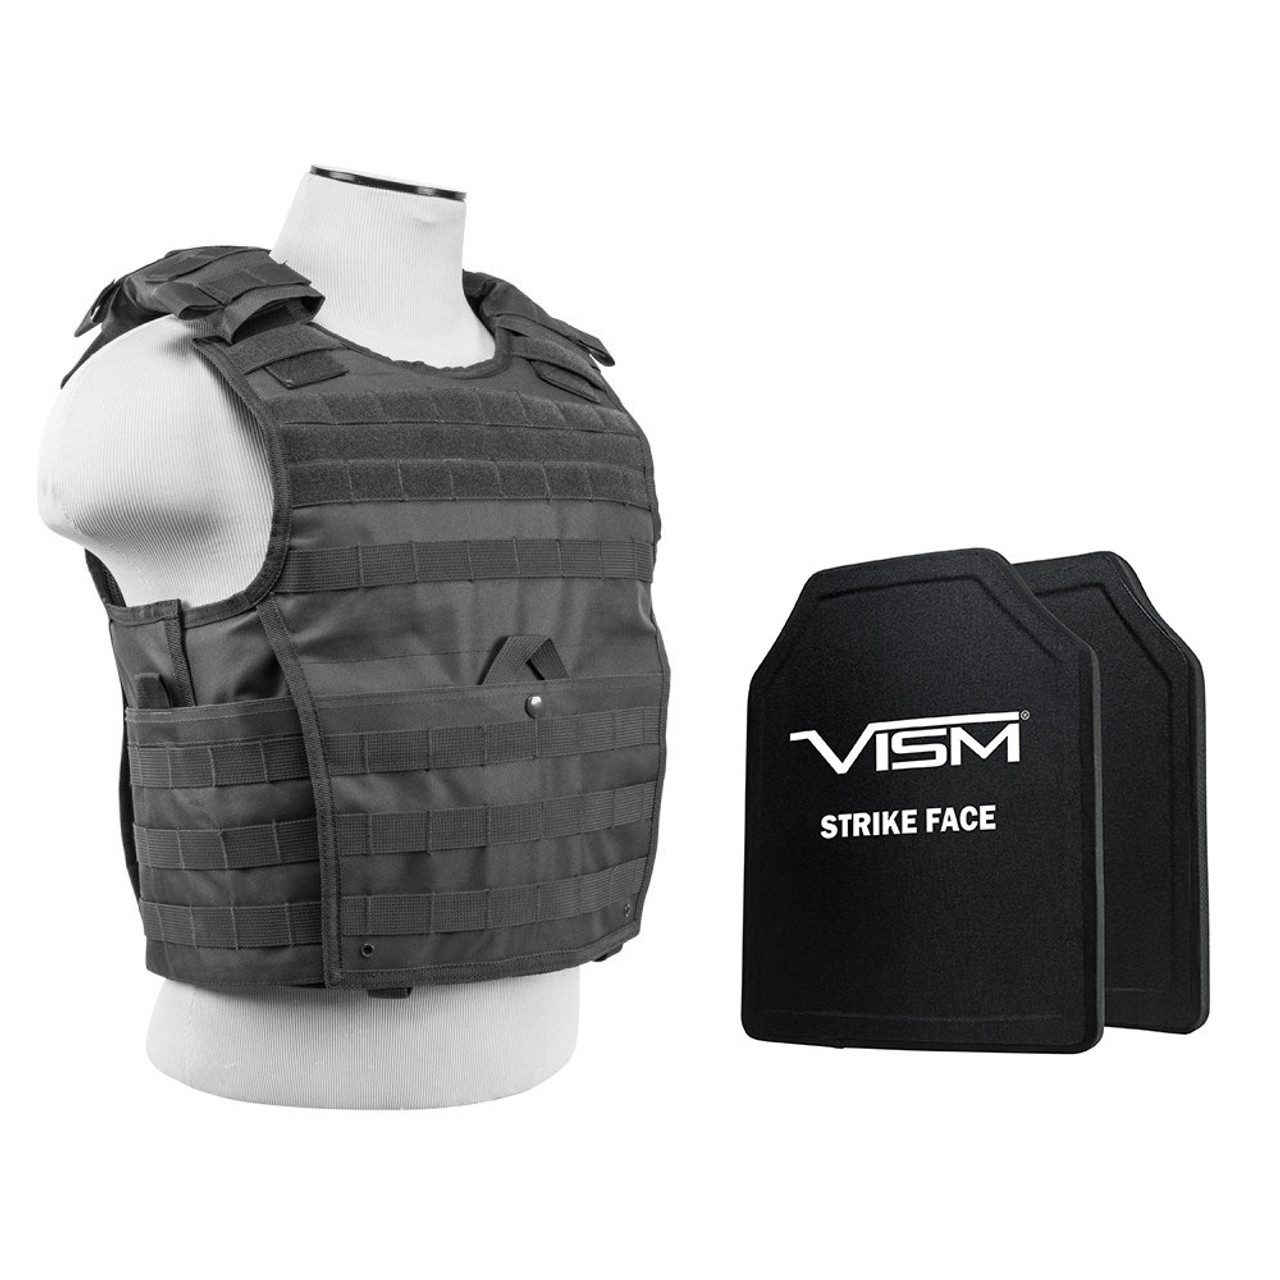 Vism By Ncstar BPCVPCVX2963U-A Expert Plate Carrier Vest (Med-2Xl) With 10"X12" Level Iii+ PE Shooters Cut 2X Hard Ballistic Plates/ Large